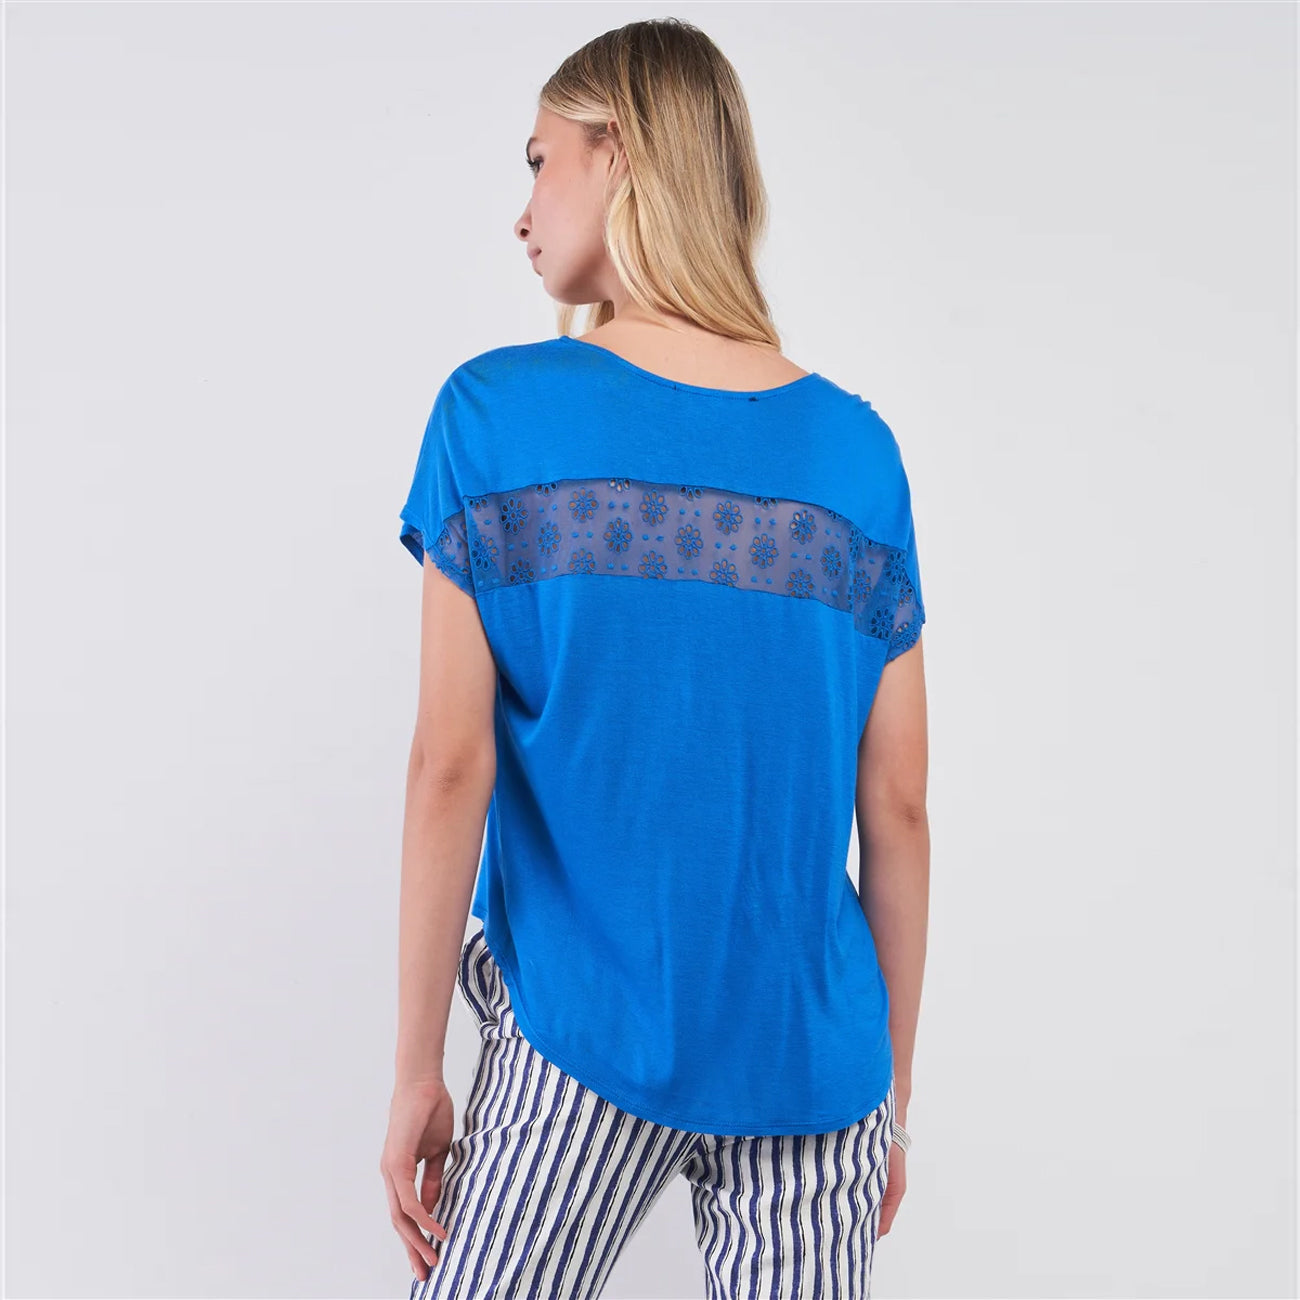 Royal Blue Boat Neck Cross Floral Embroidery Women's Top